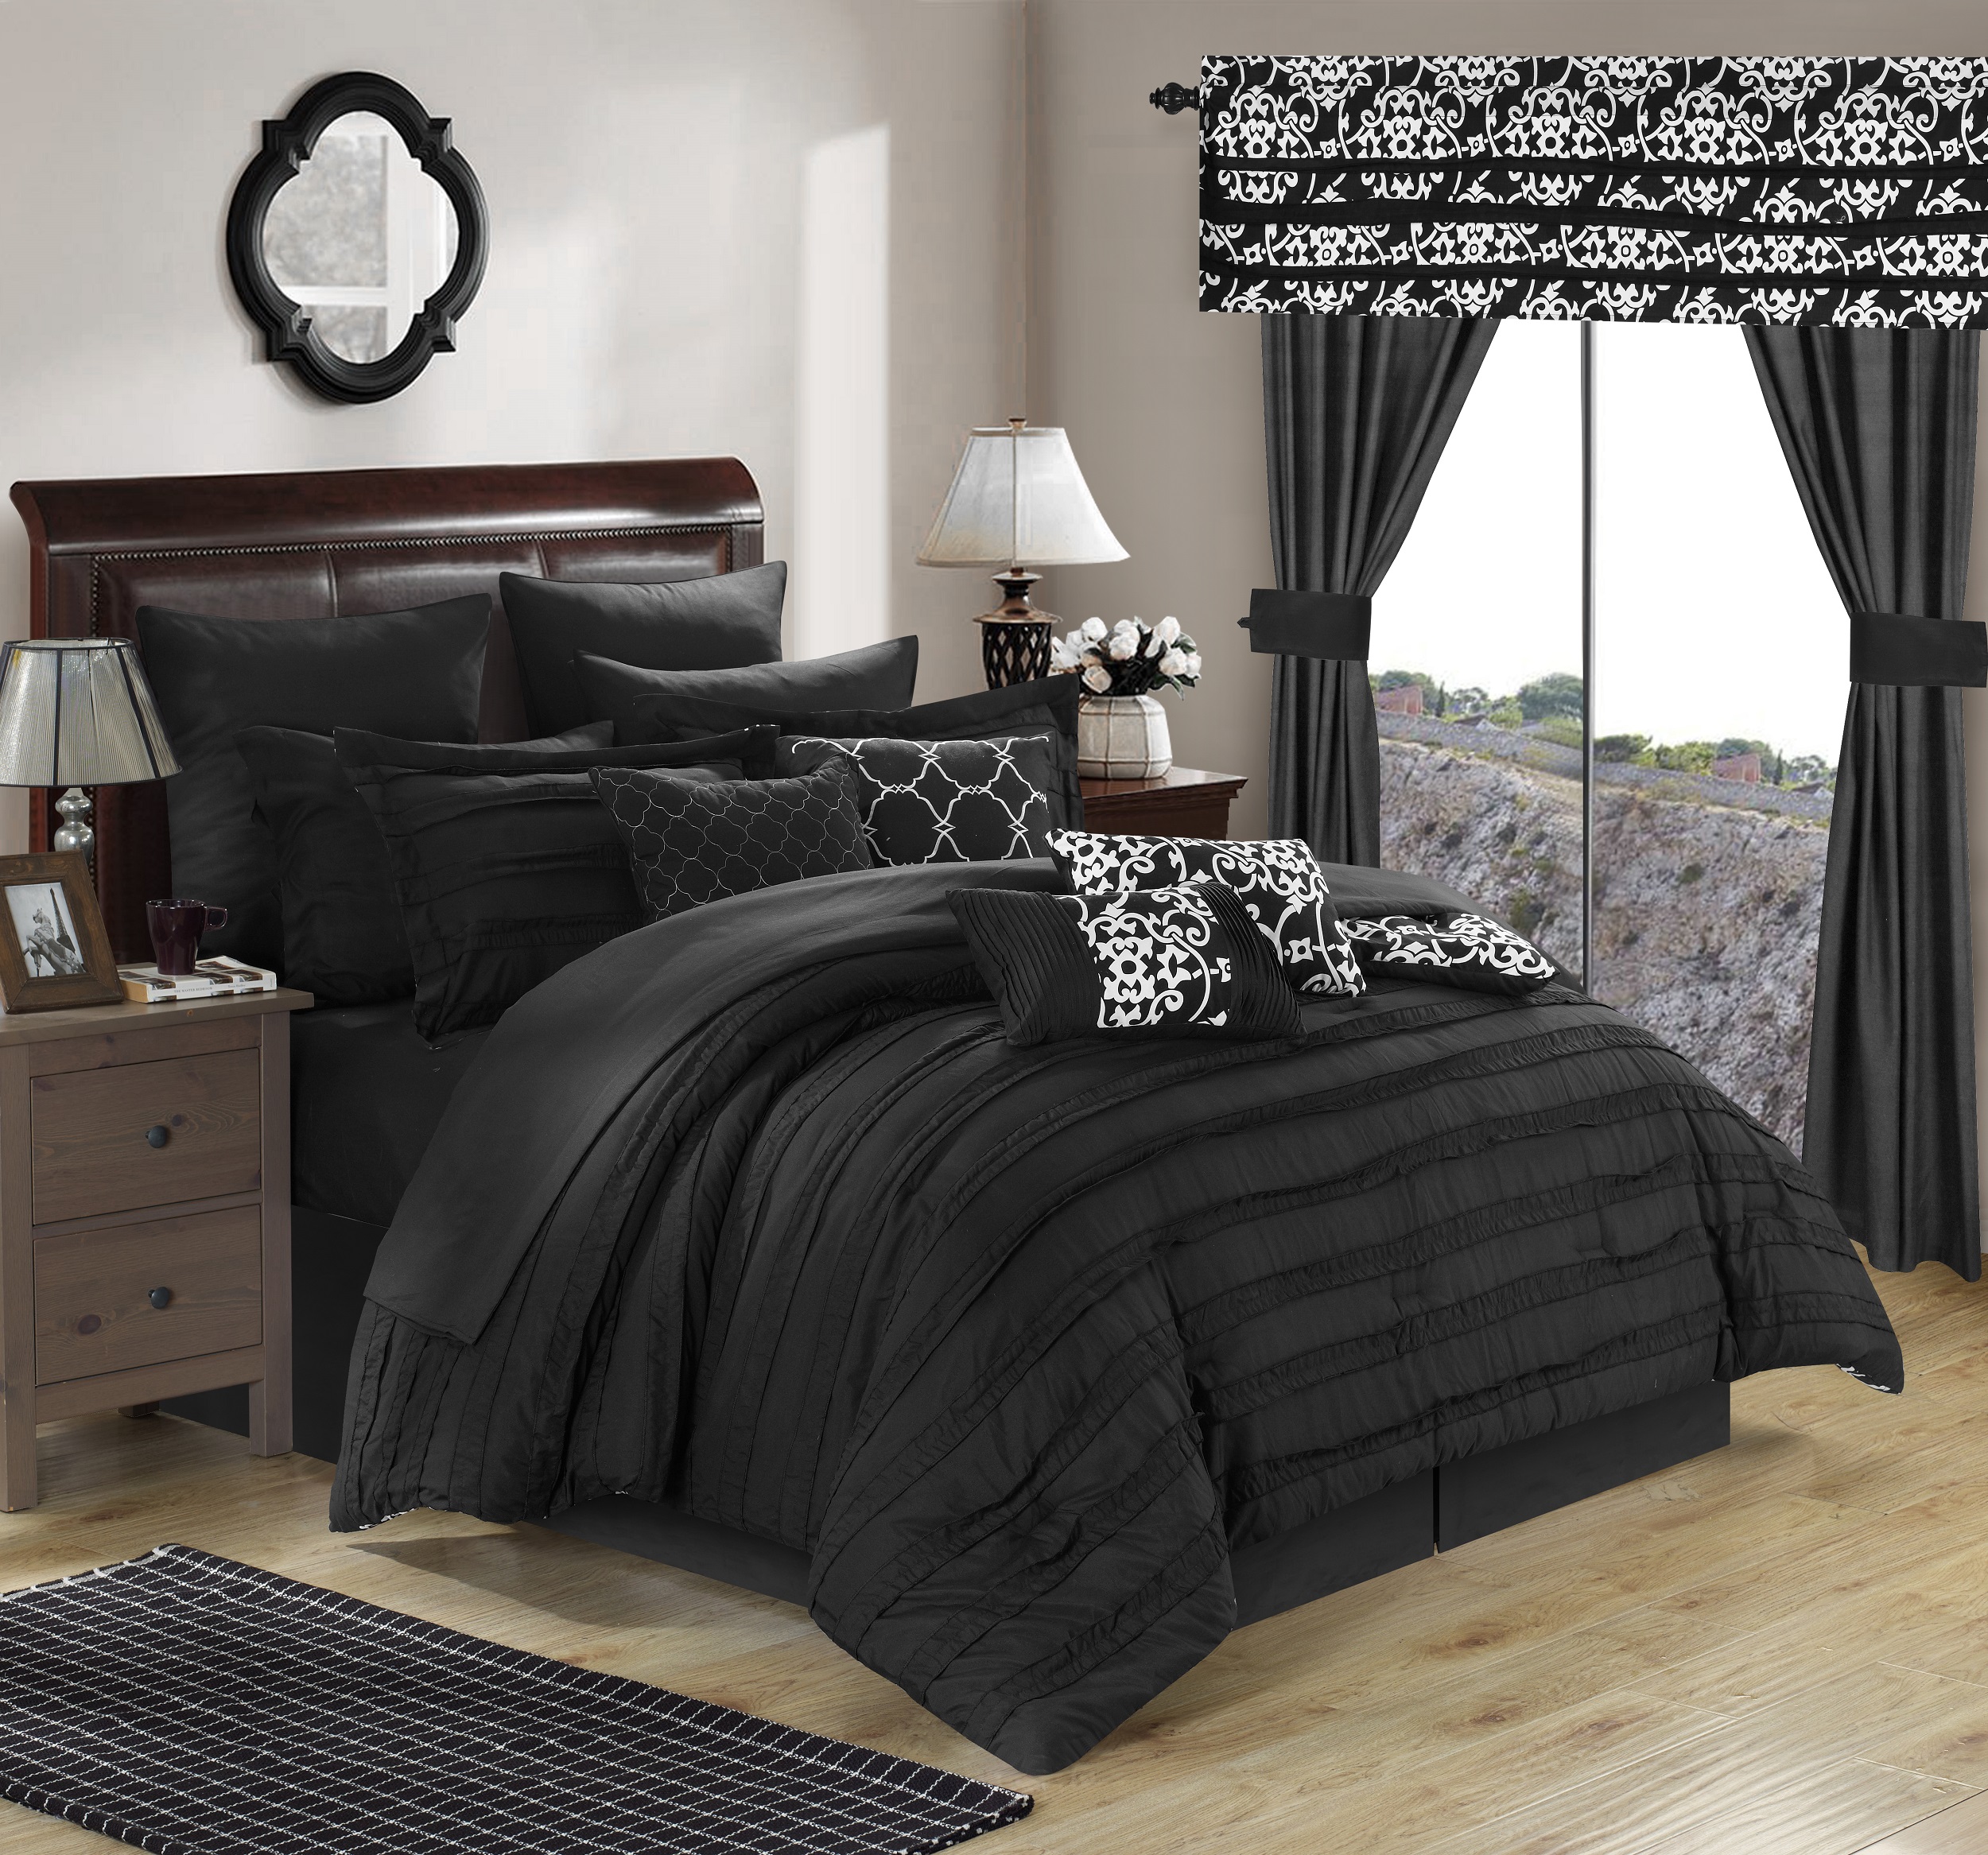 Chic Home Hailee 24pc Queen Size Comforter Set - Black